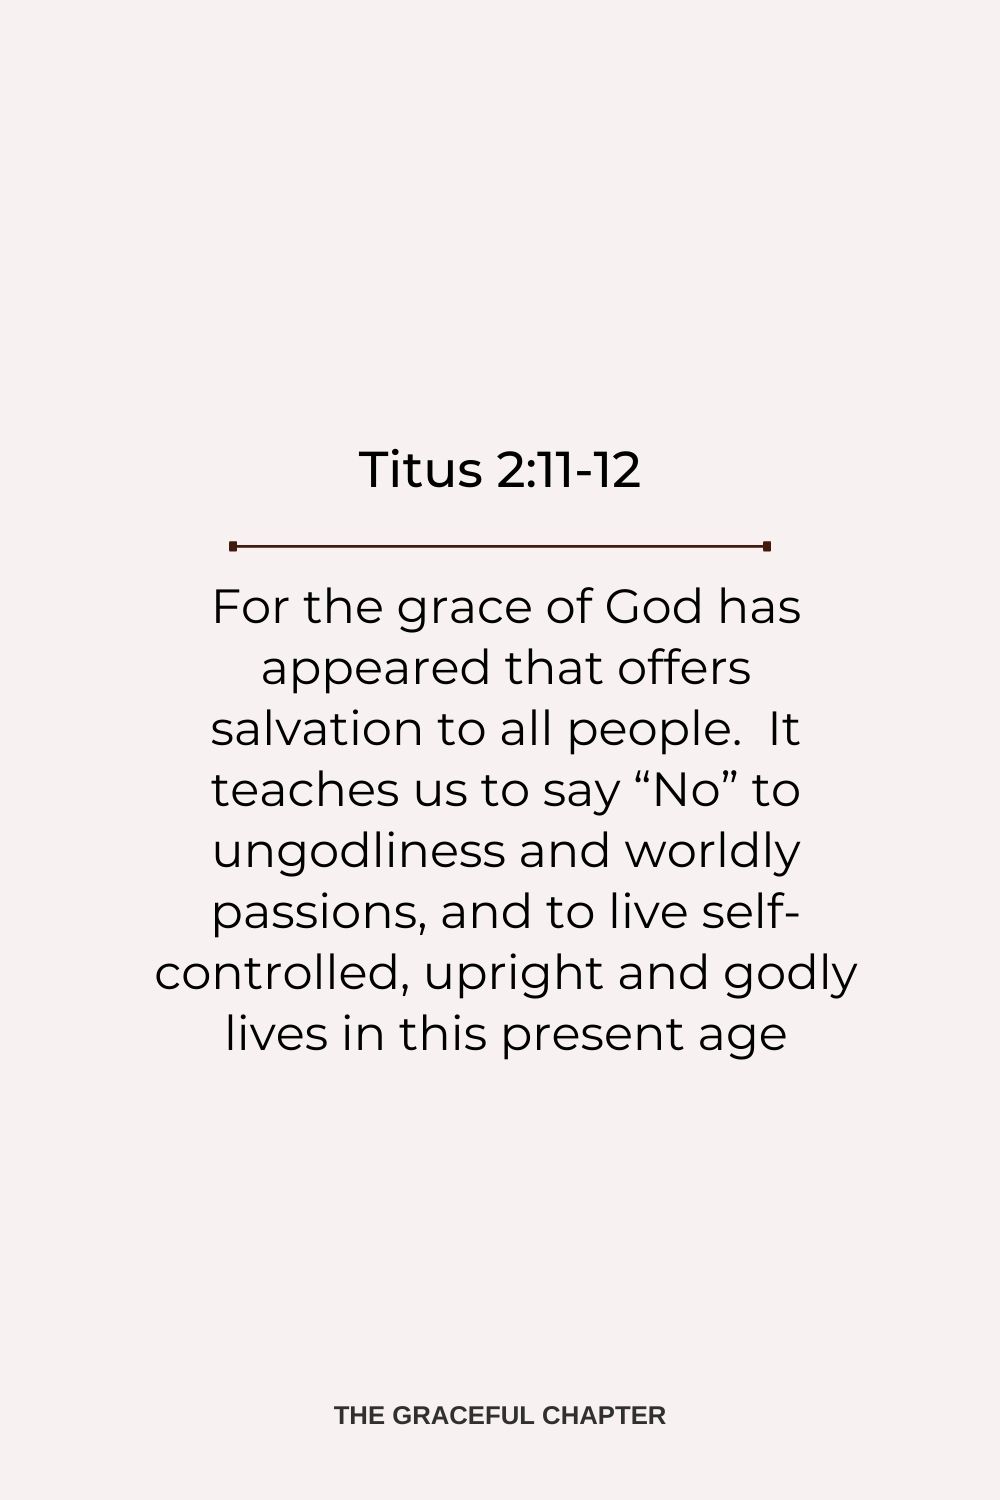 For the grace of God has appeared that offers salvation to all people.  It teaches us to say “No” to ungodliness and worldly passions, and to live self-controlled, upright and godly lives in this present age. Titus 2:11-12